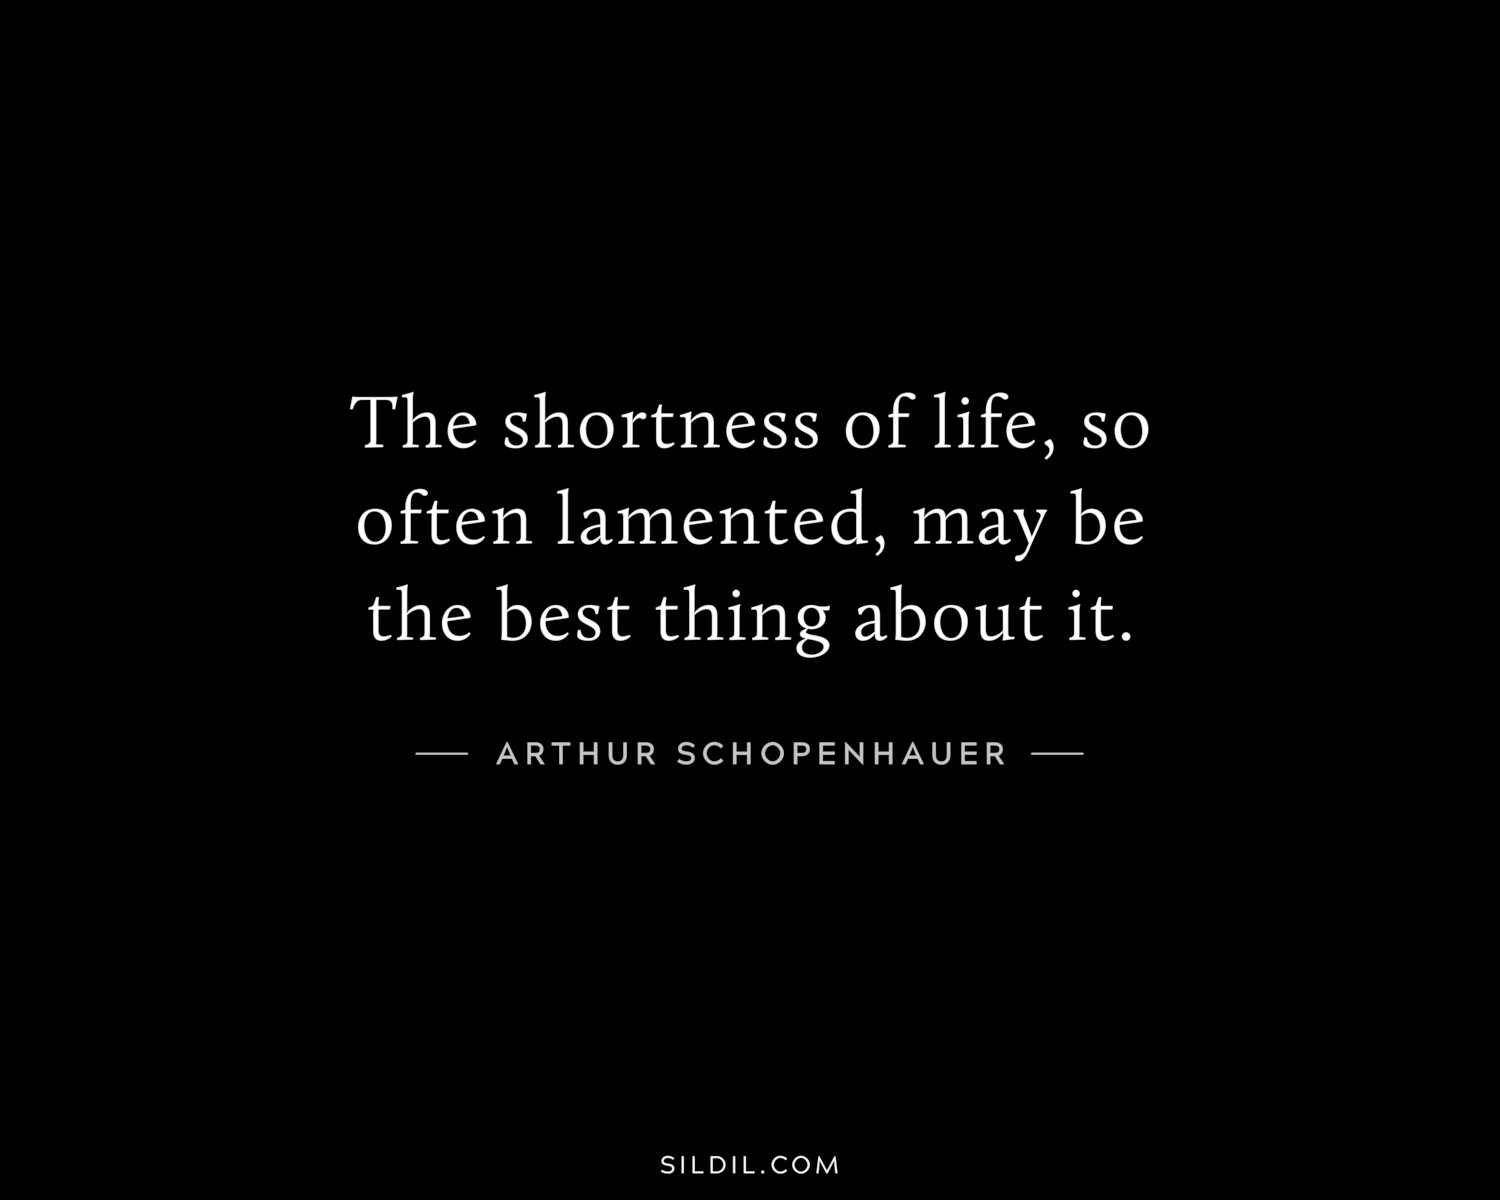 The shortness of life, so often lamented, may be the best thing about it.